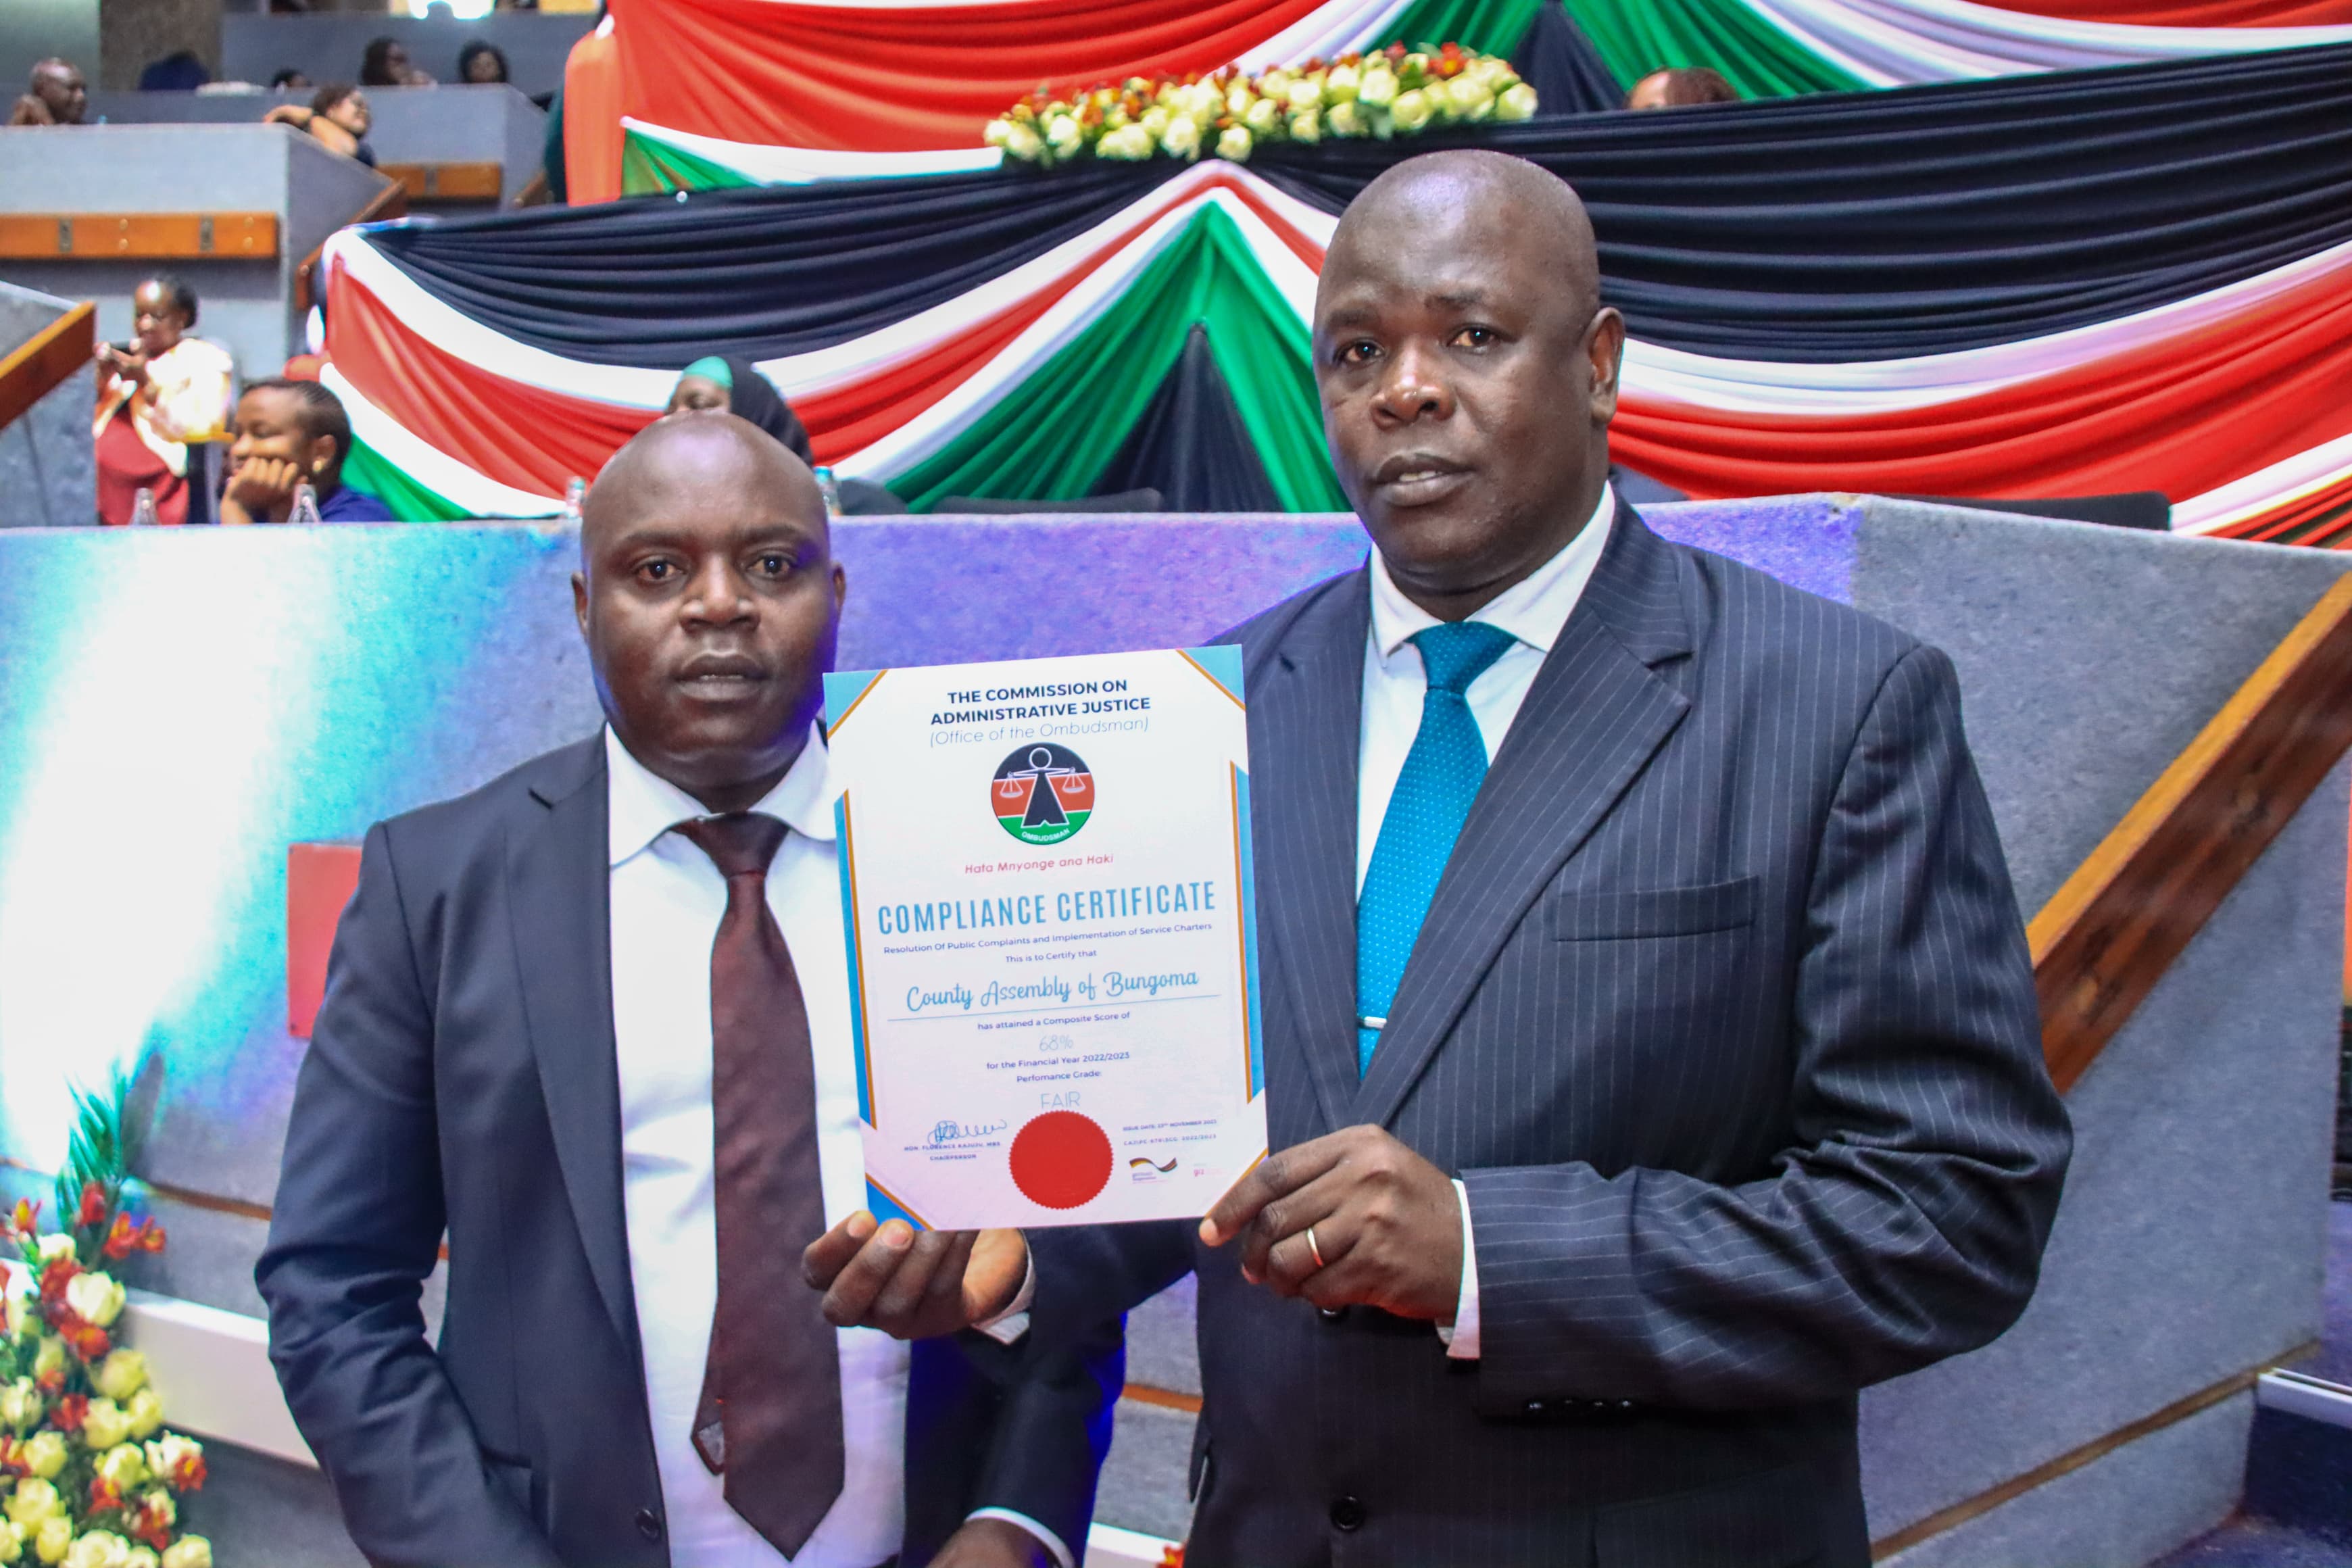 Speaker Hon. Emmanuel Situma and Clerk Mr. Charles W. Wafula display the certificate awarded to the County Assembly of Bungoma for effective handling of complaints and implementation of the service charter